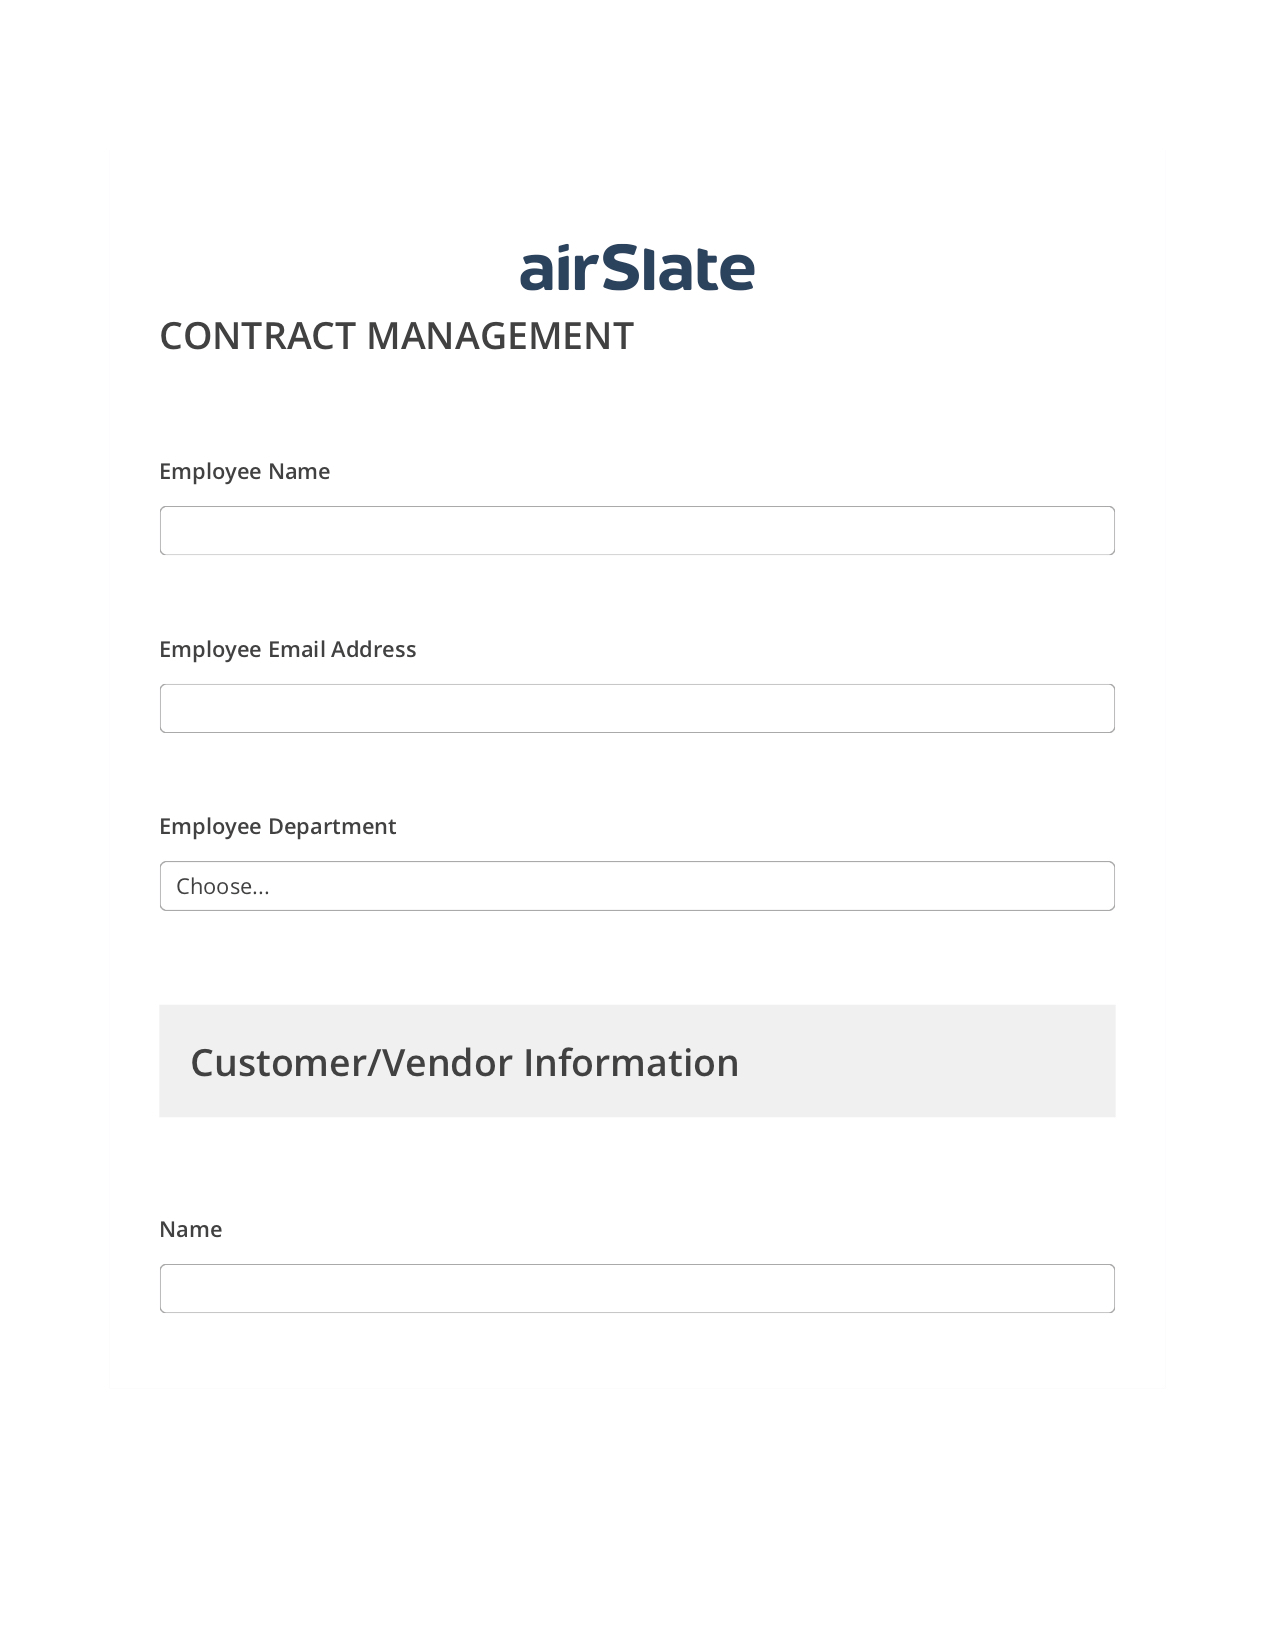 Contract Management Workflow Pre-fill Slate from MS Dynamics 365 record, Lock the Slate Bot, Export to Smartsheet